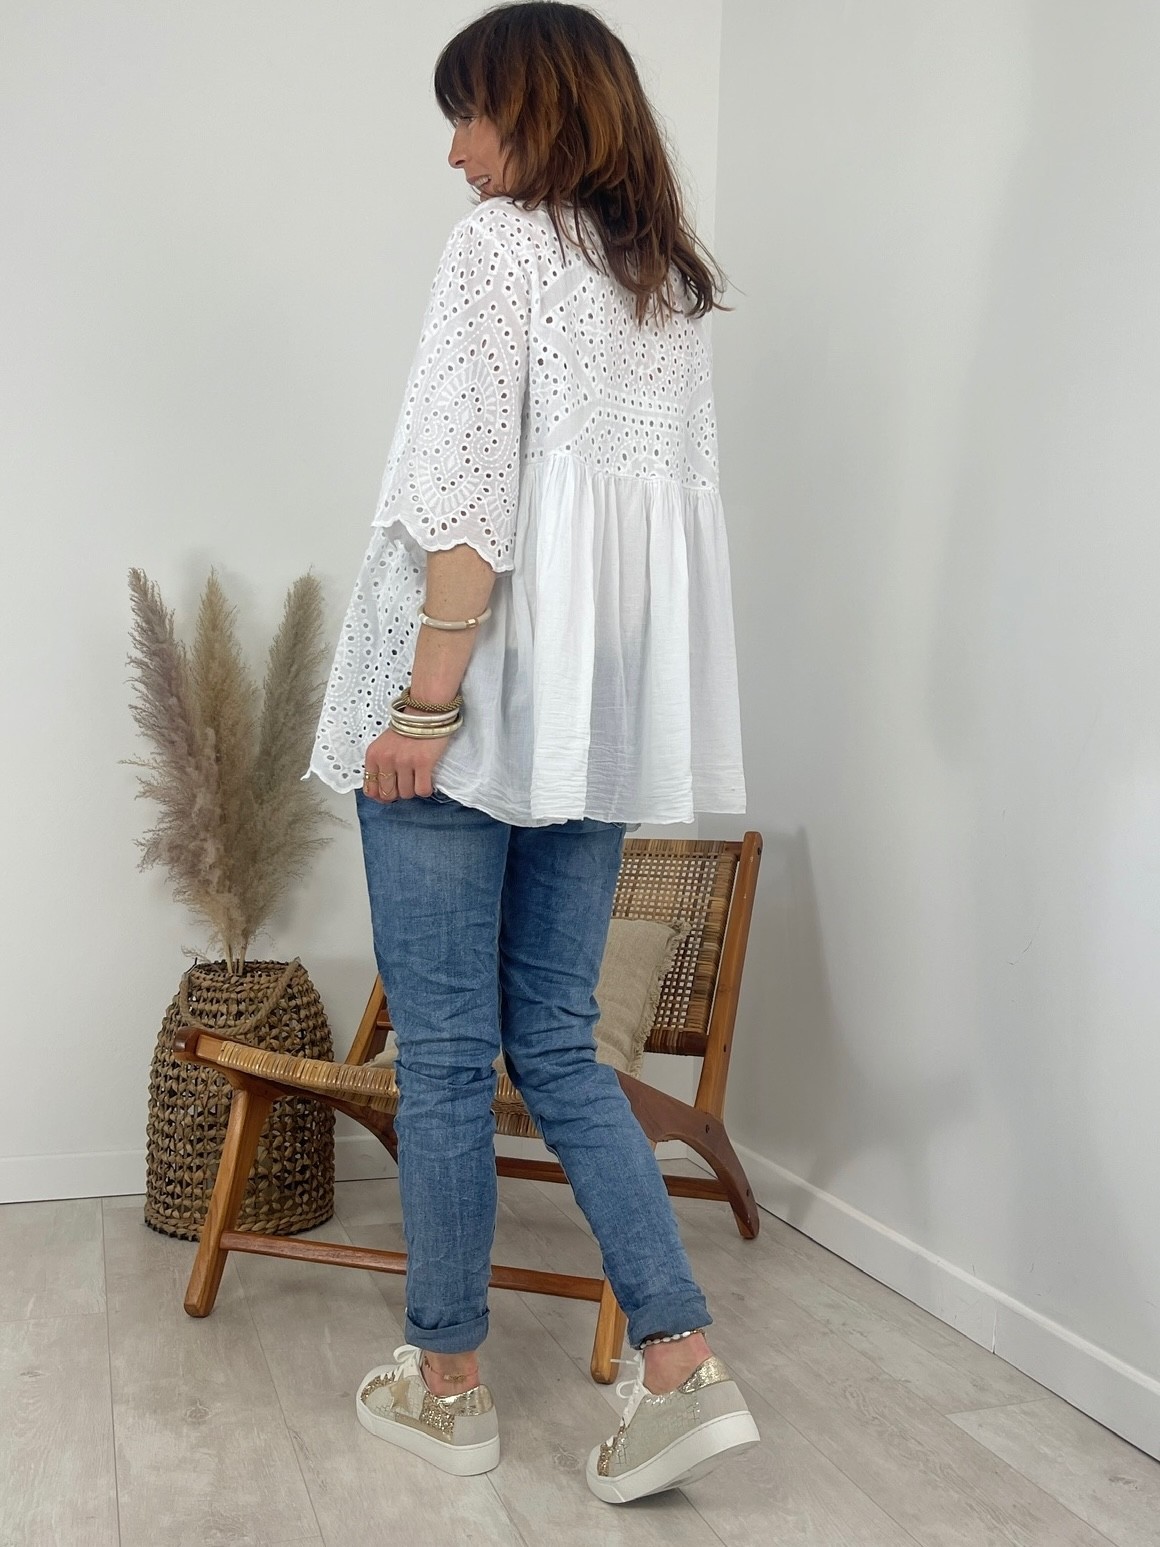 Blouse broderie blanche